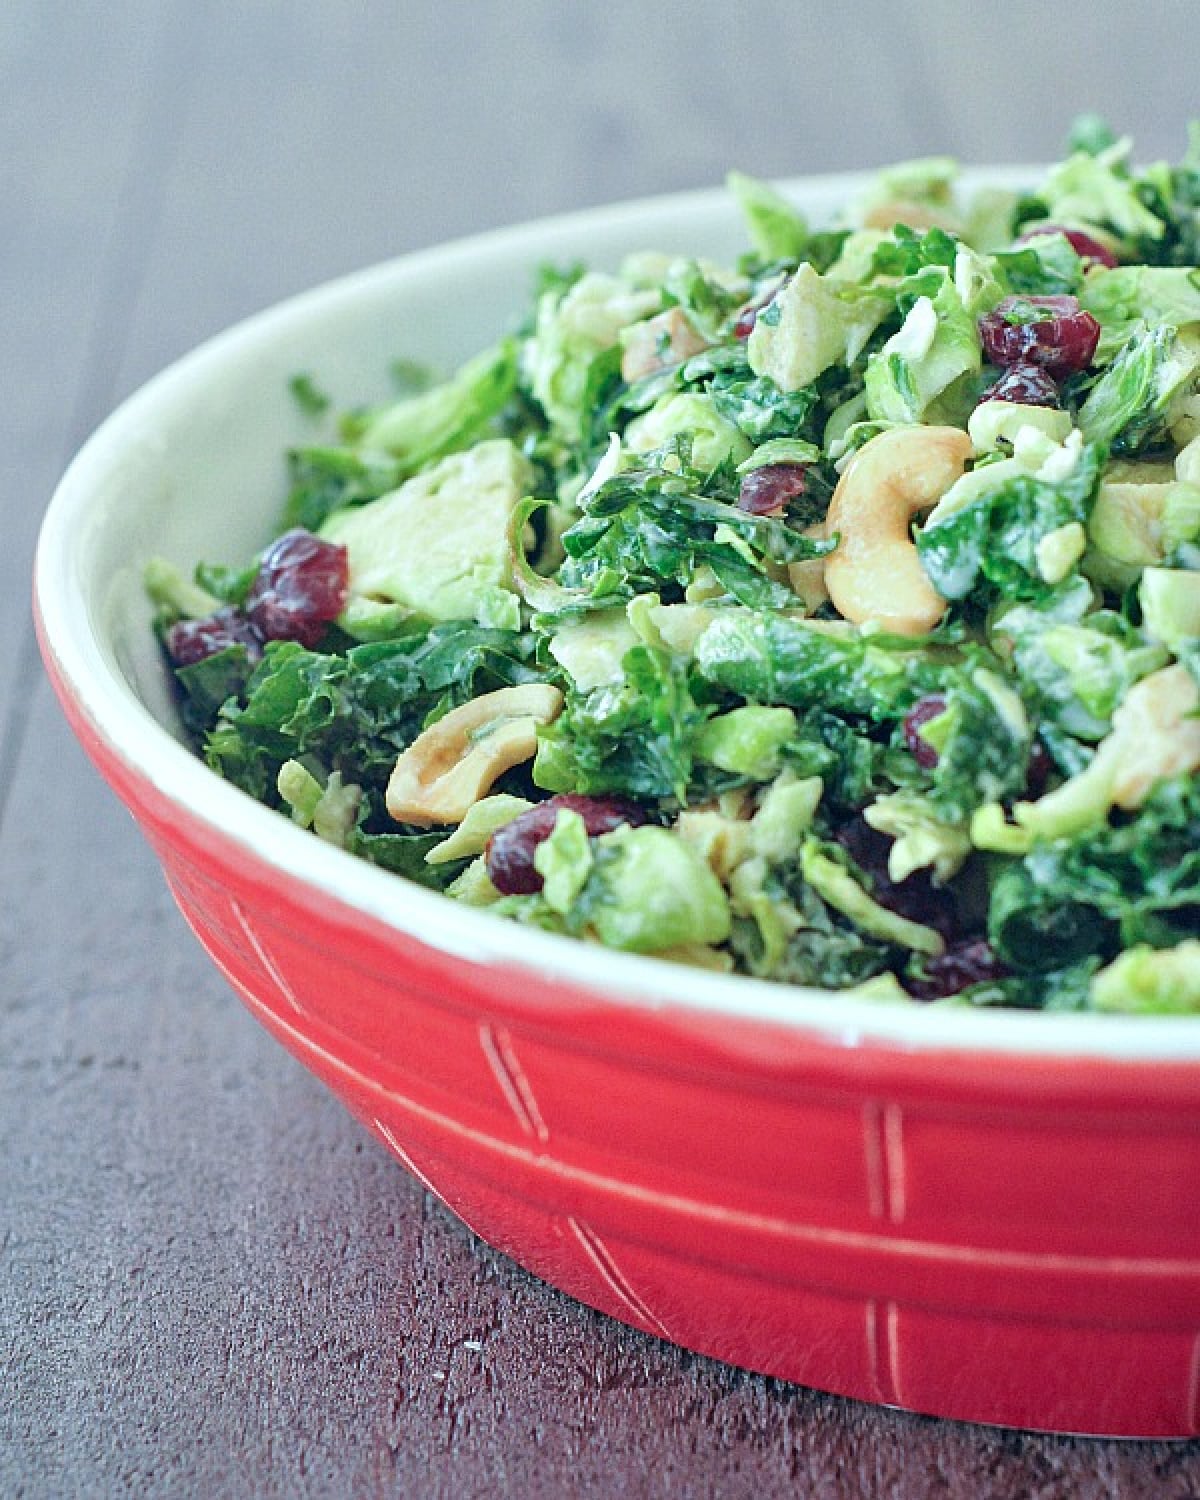 Lemon brussels and kale salad with cashews and dried cranberries in a large red serving bowl